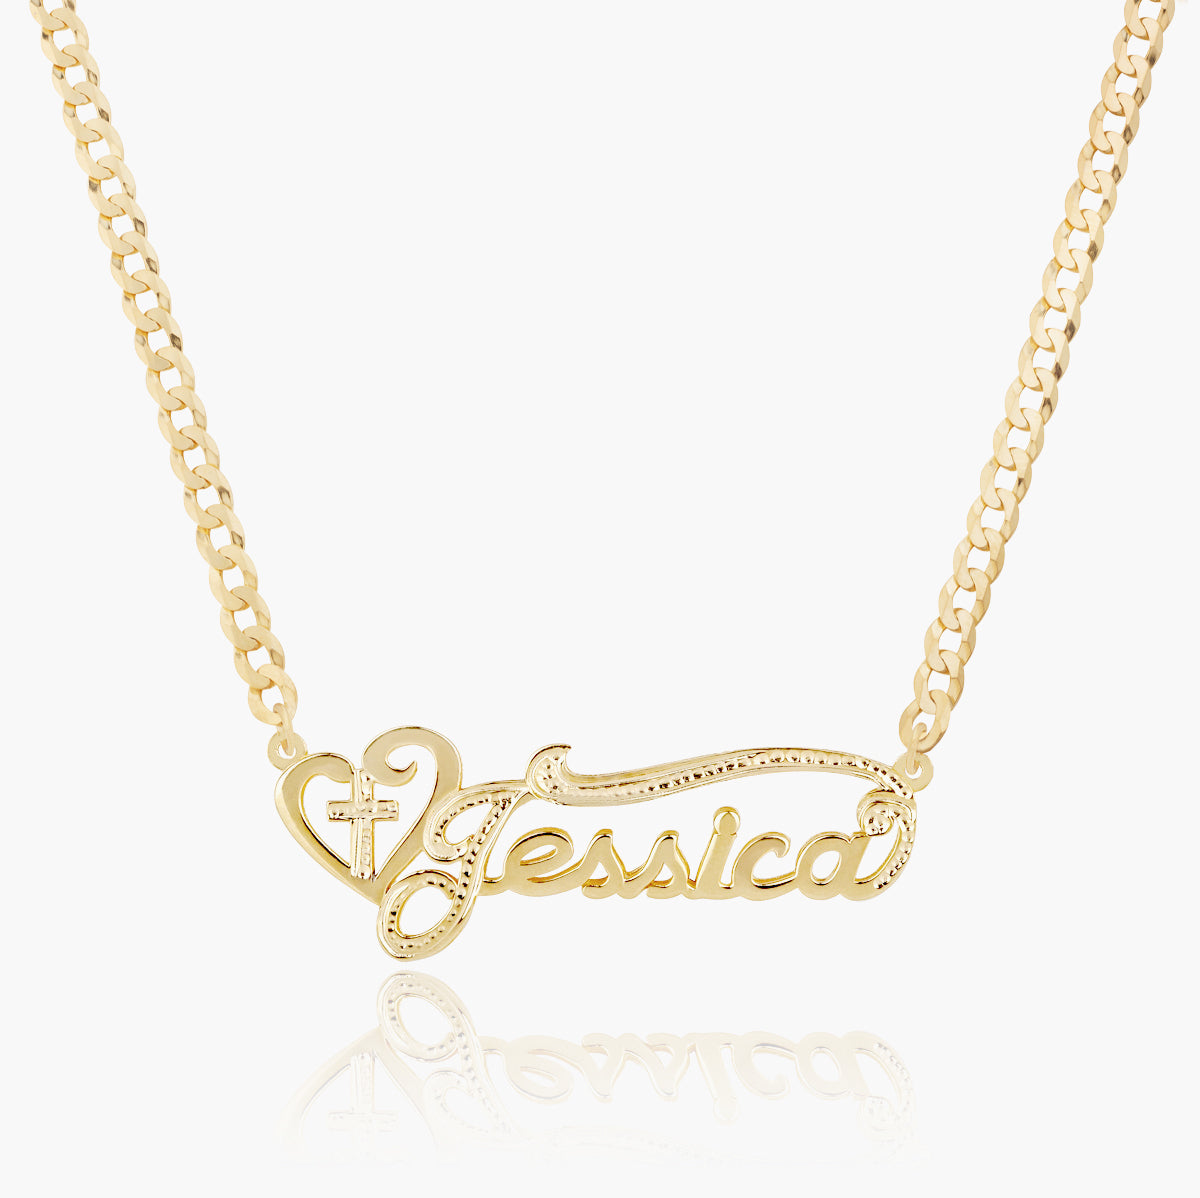 The Golden Double Plated Cross Name Necklace